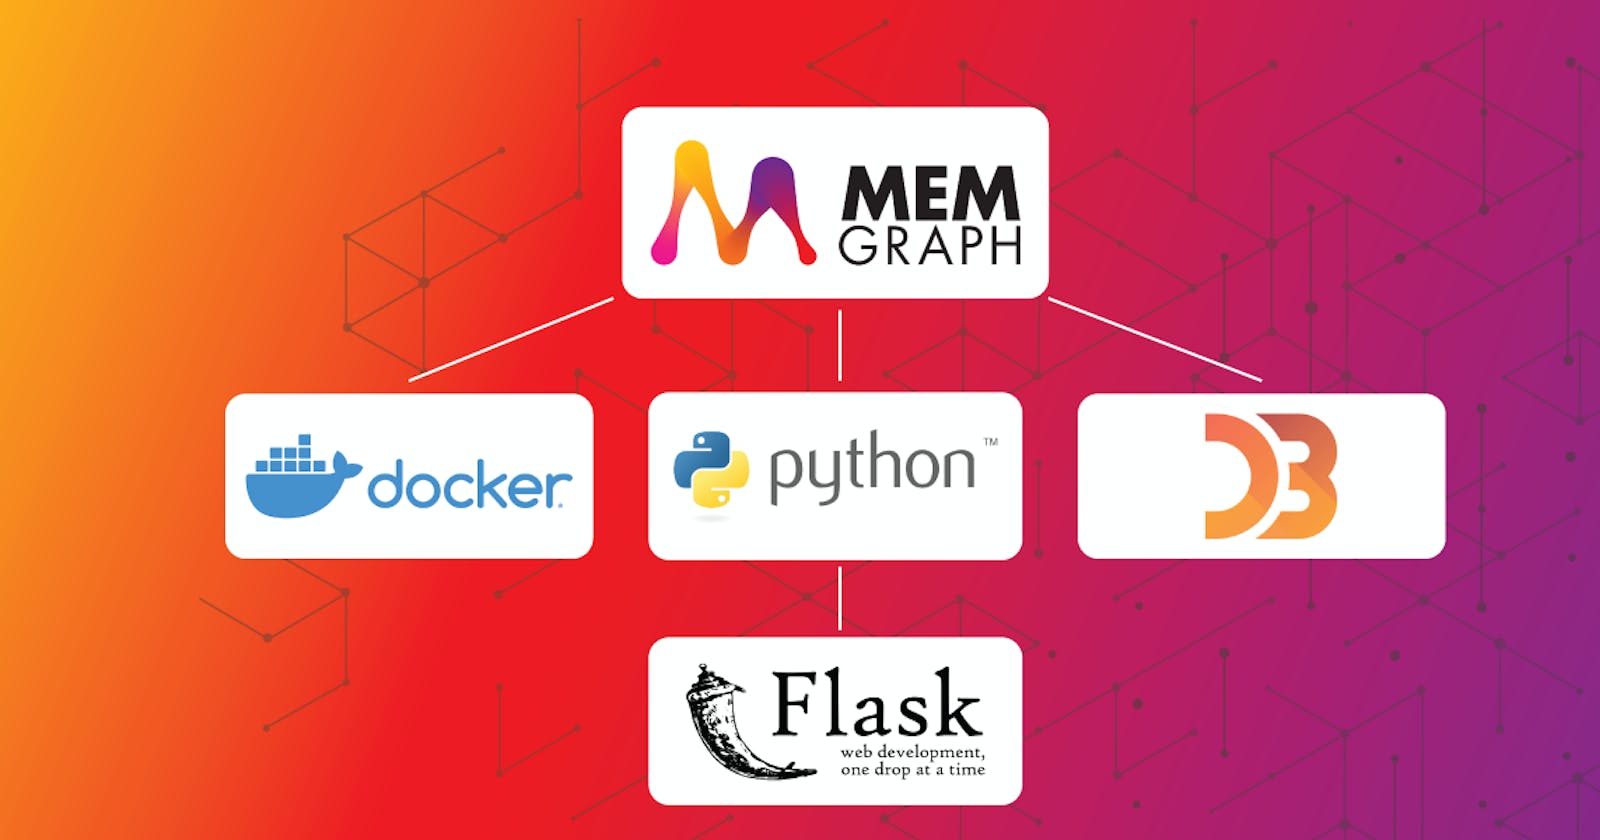 How to Build a Graph Web Application With Python, Flask, Docker & Memgraph